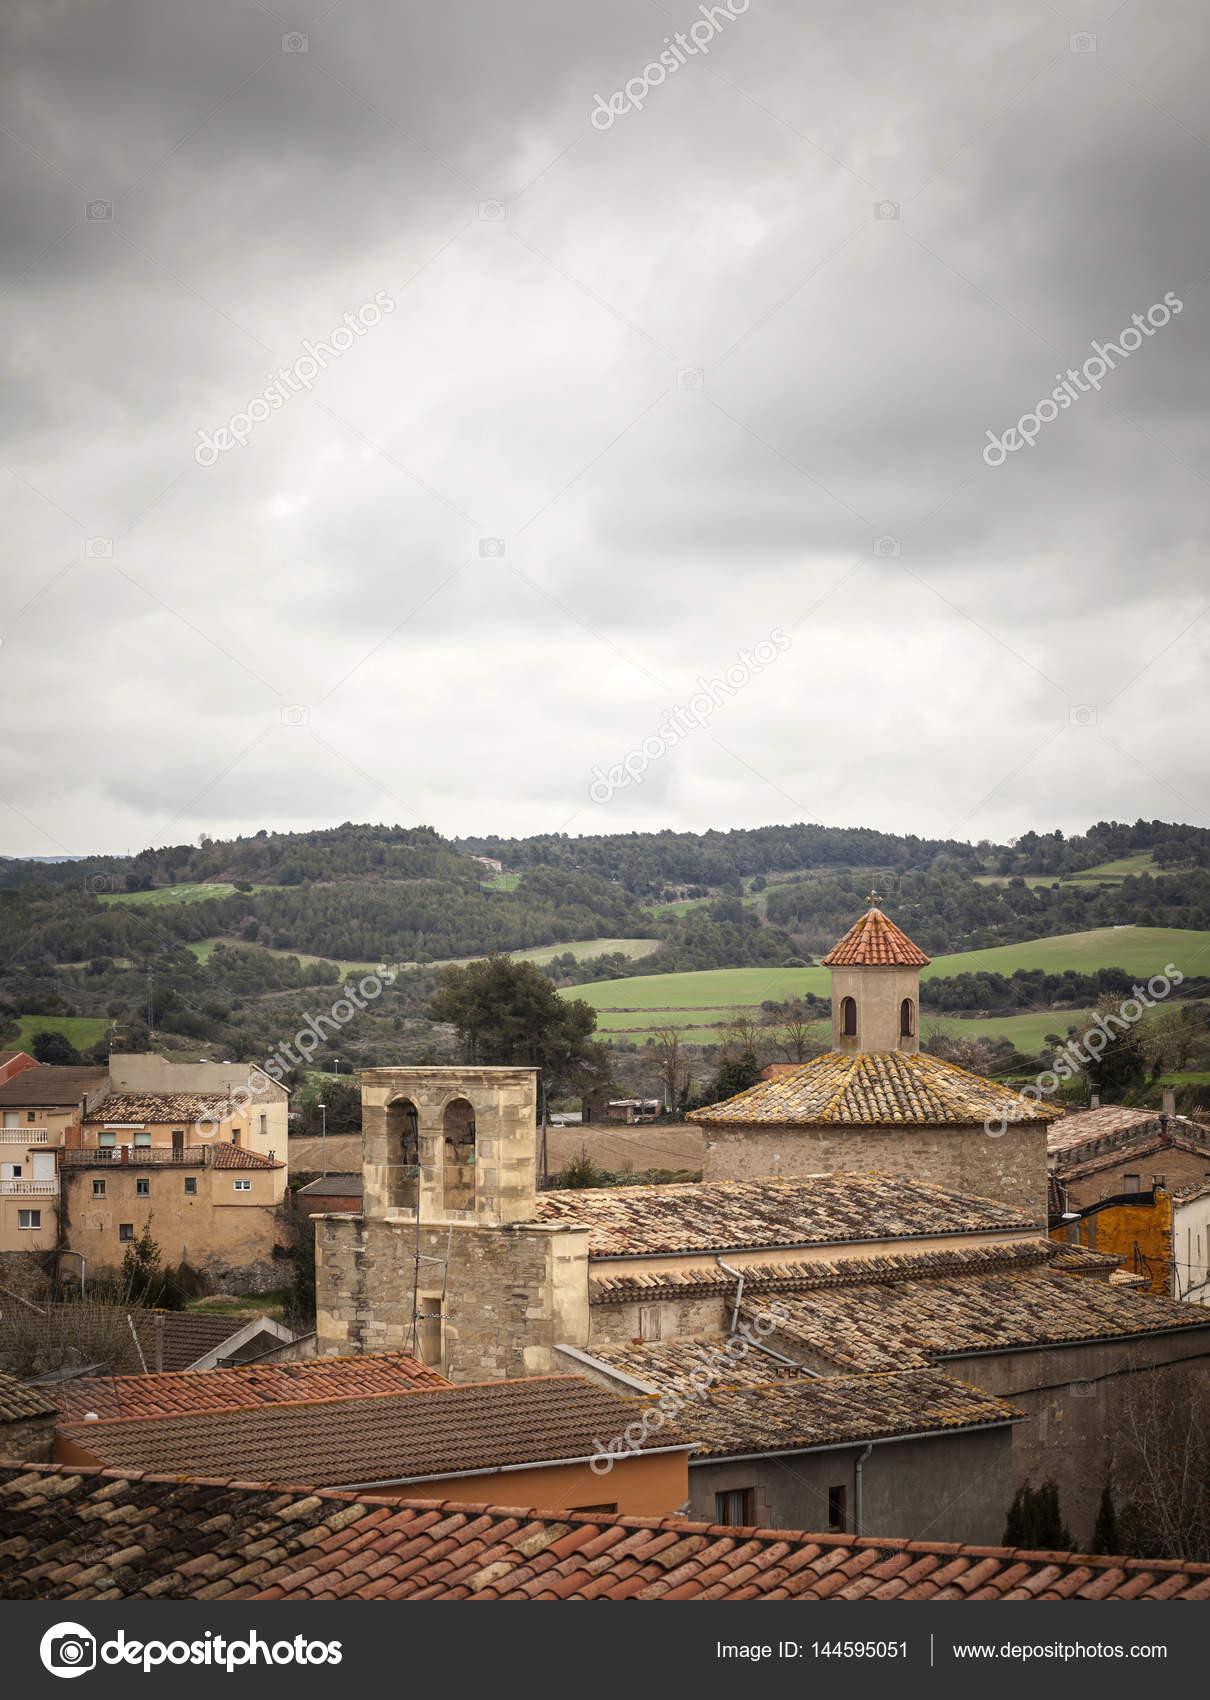 Village view, cloudy day in Calders, Moianes region comarca ...